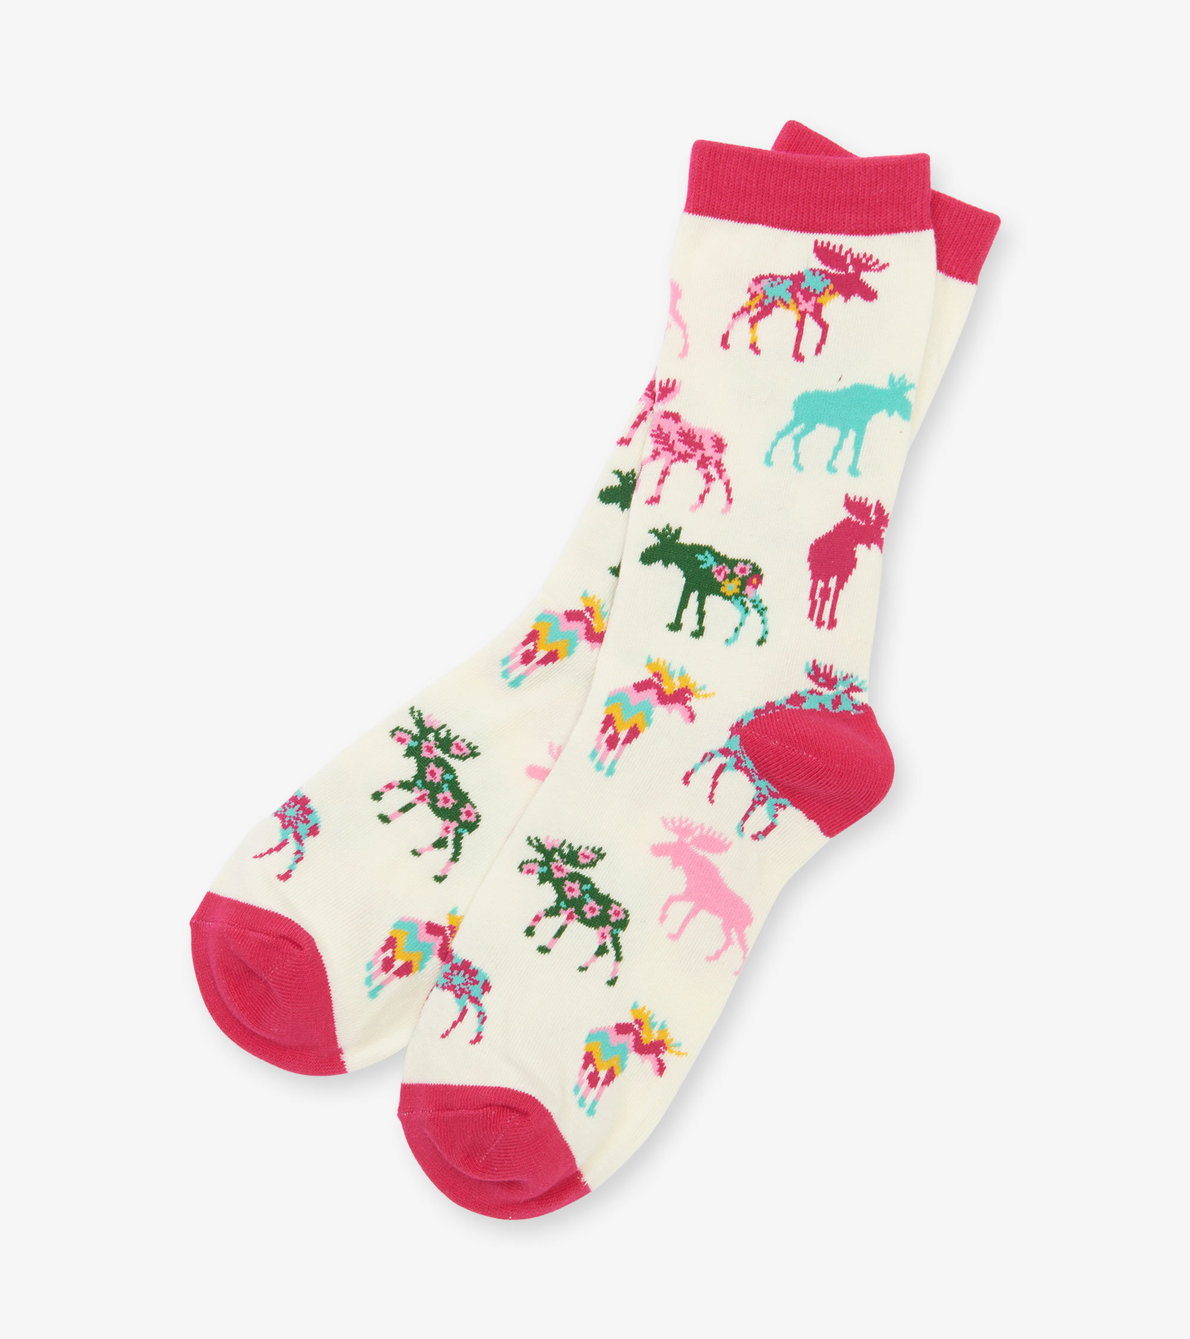 View larger image of Patterned Moose Women's Crew Socks